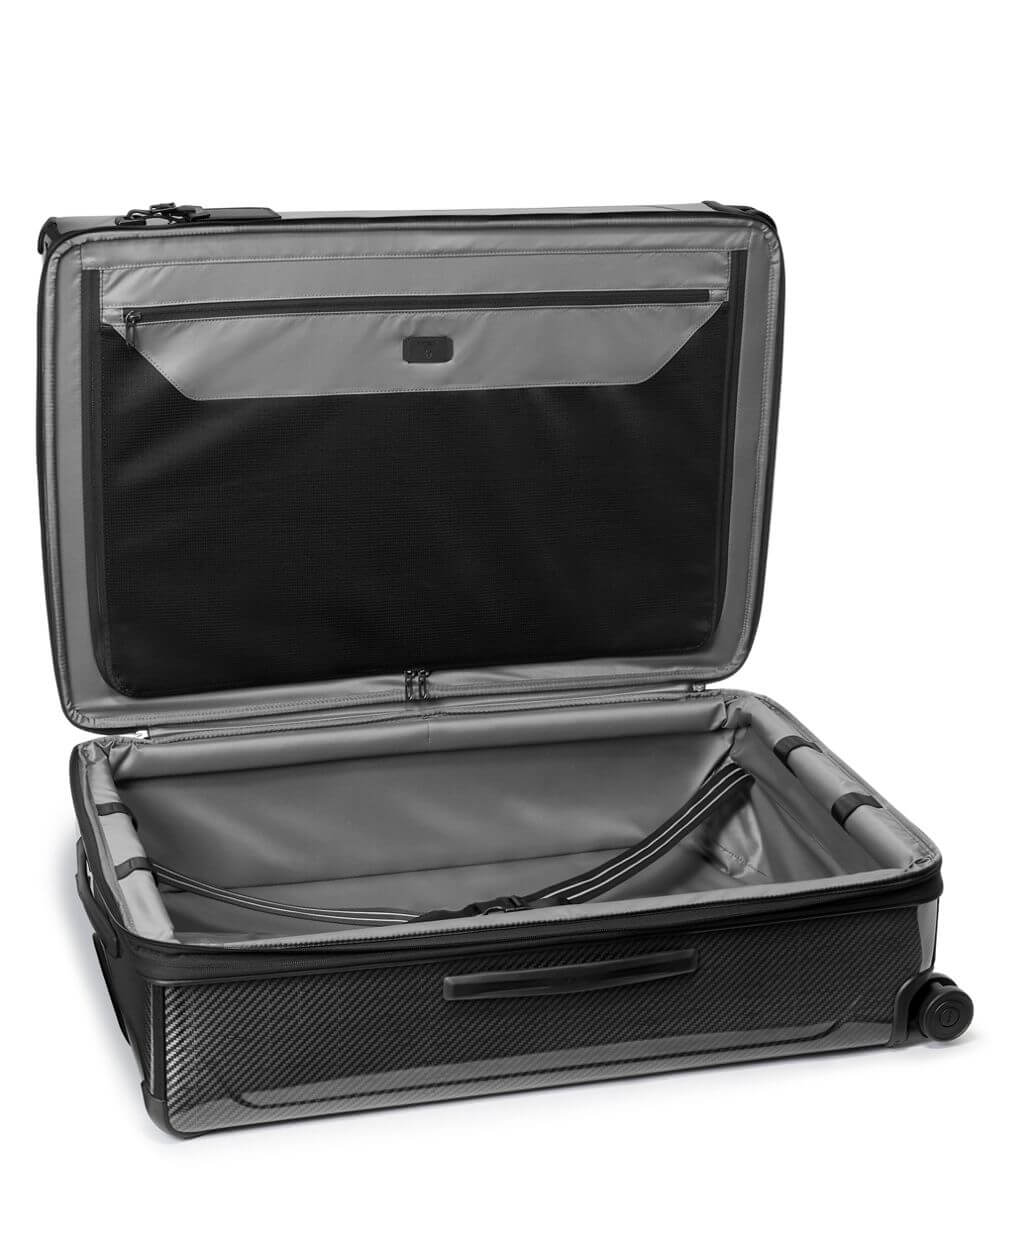 Tumi Large Trip Expandable Suitcase open with garment organizer in graphite color